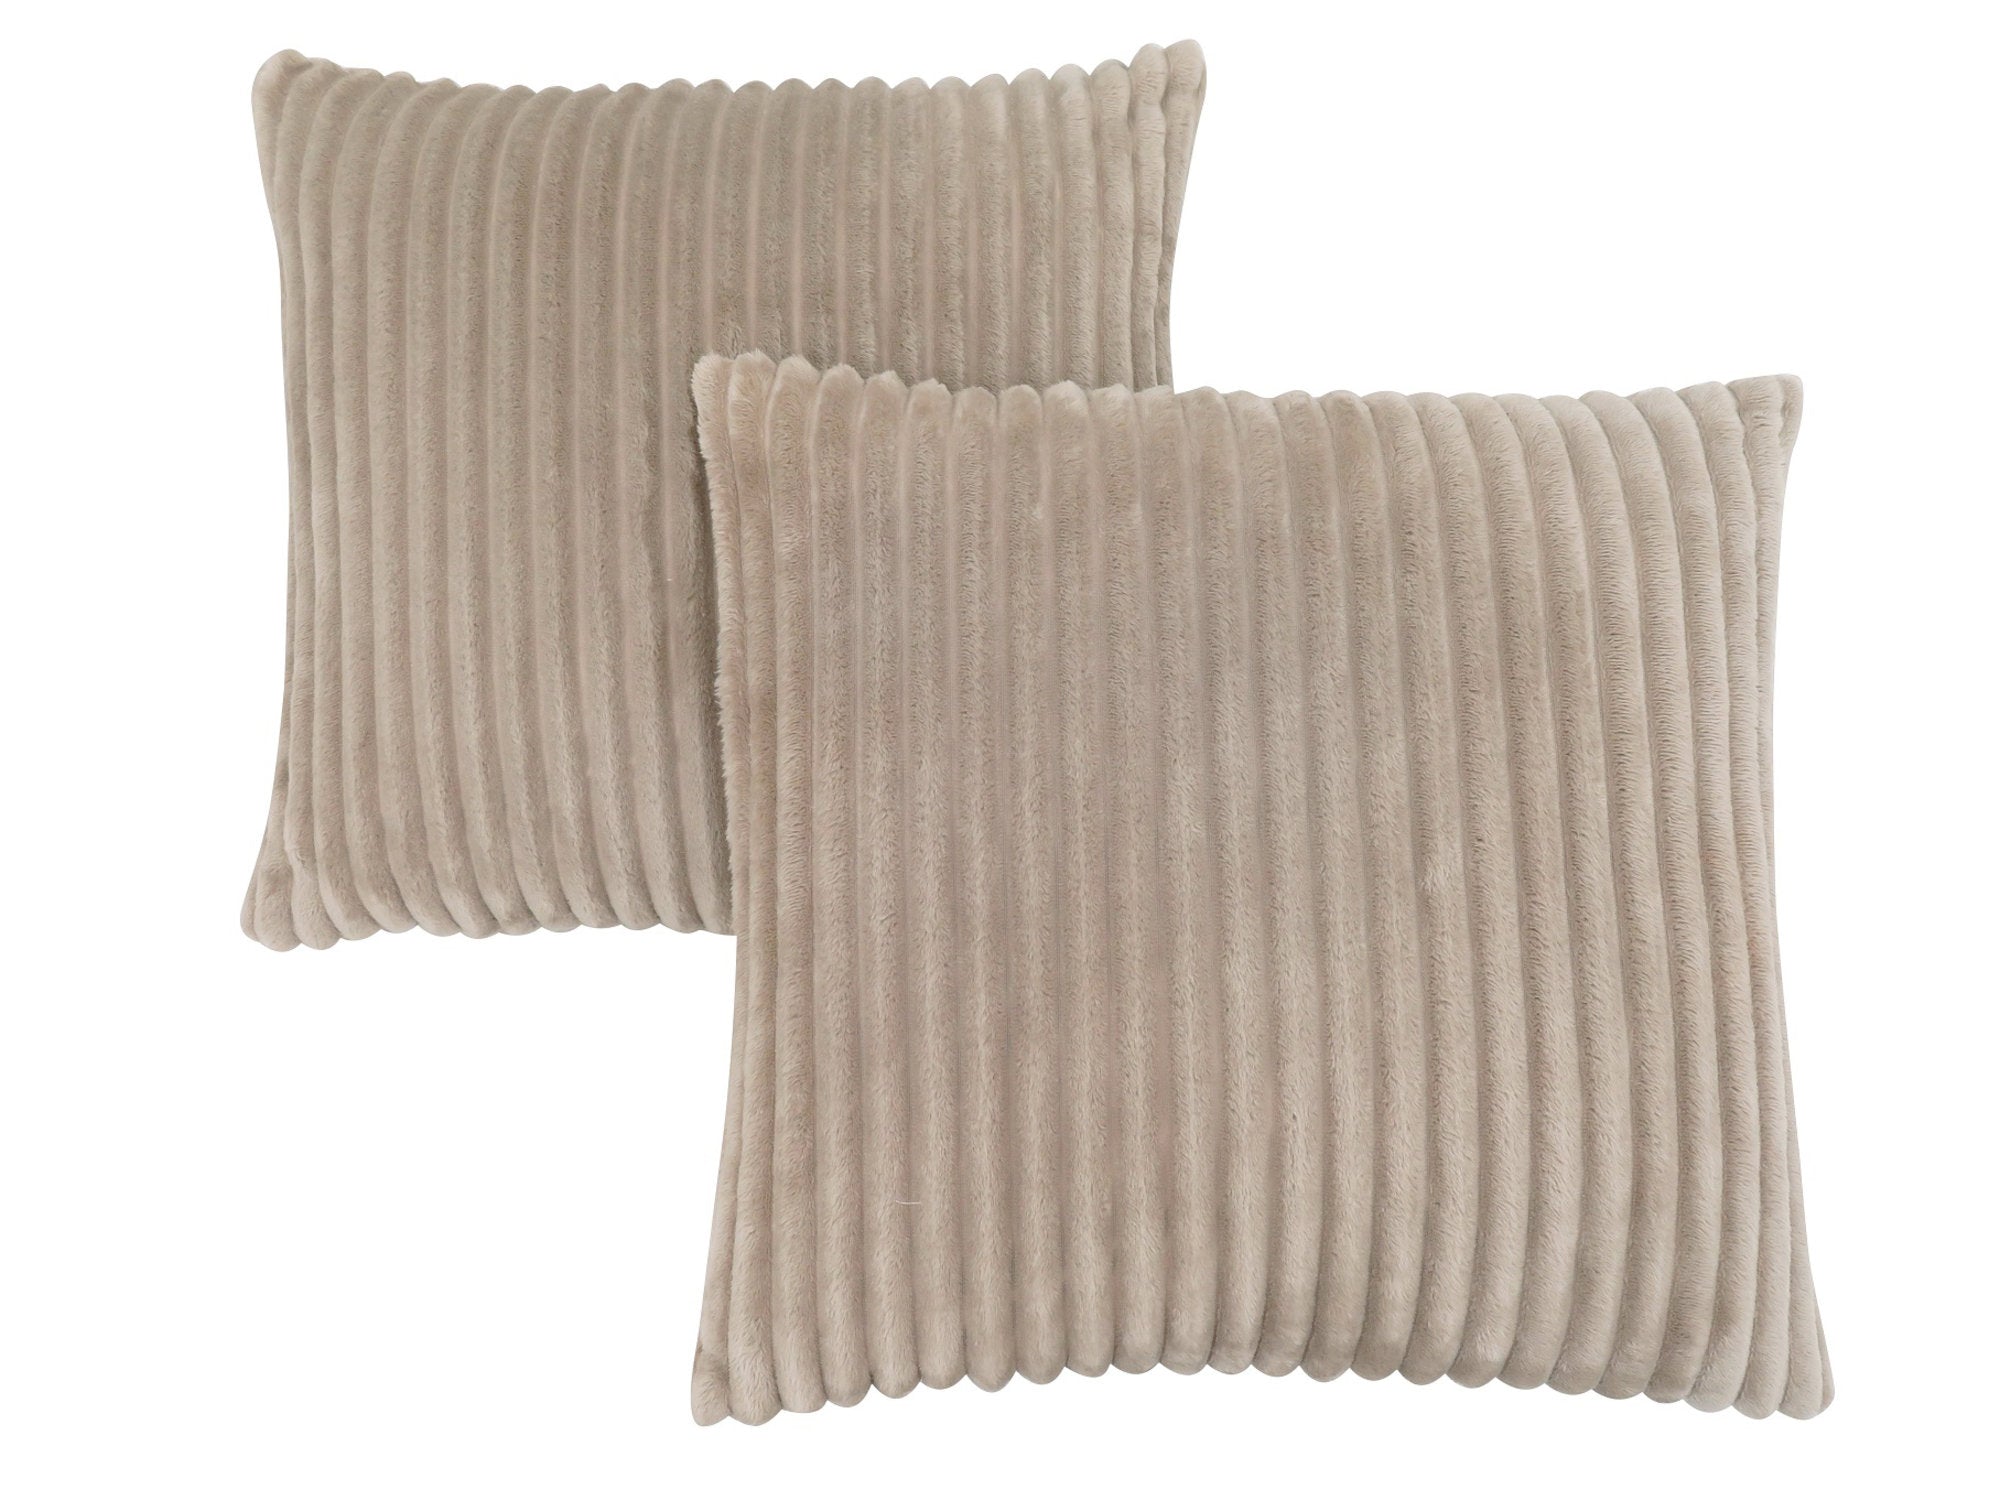 MN-969355    Pillows, Set Of 2, 18 X 18 Square, Insert Included, Decorative Throw, Accent, Sofa, Couch, Bed, Faux Fur Polyester Fabric, Hypoallergenic Soft Polyester Insert, Beige, Transitional